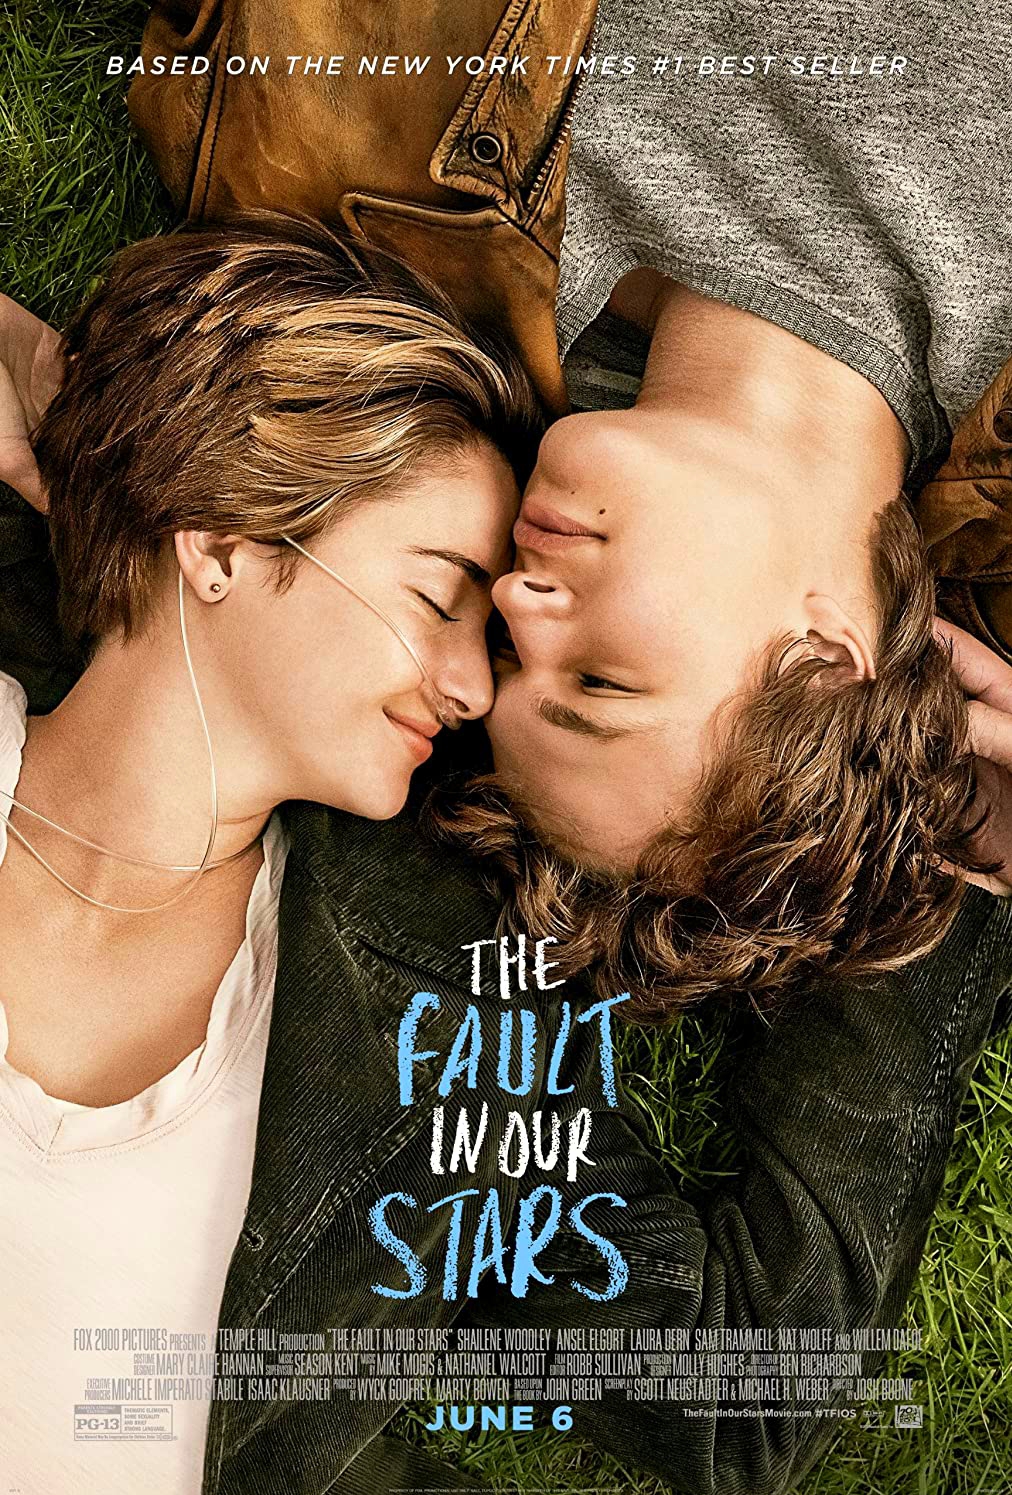 The Fault in Our Stars (2014) ดาวบันดาล Shailene Woodley